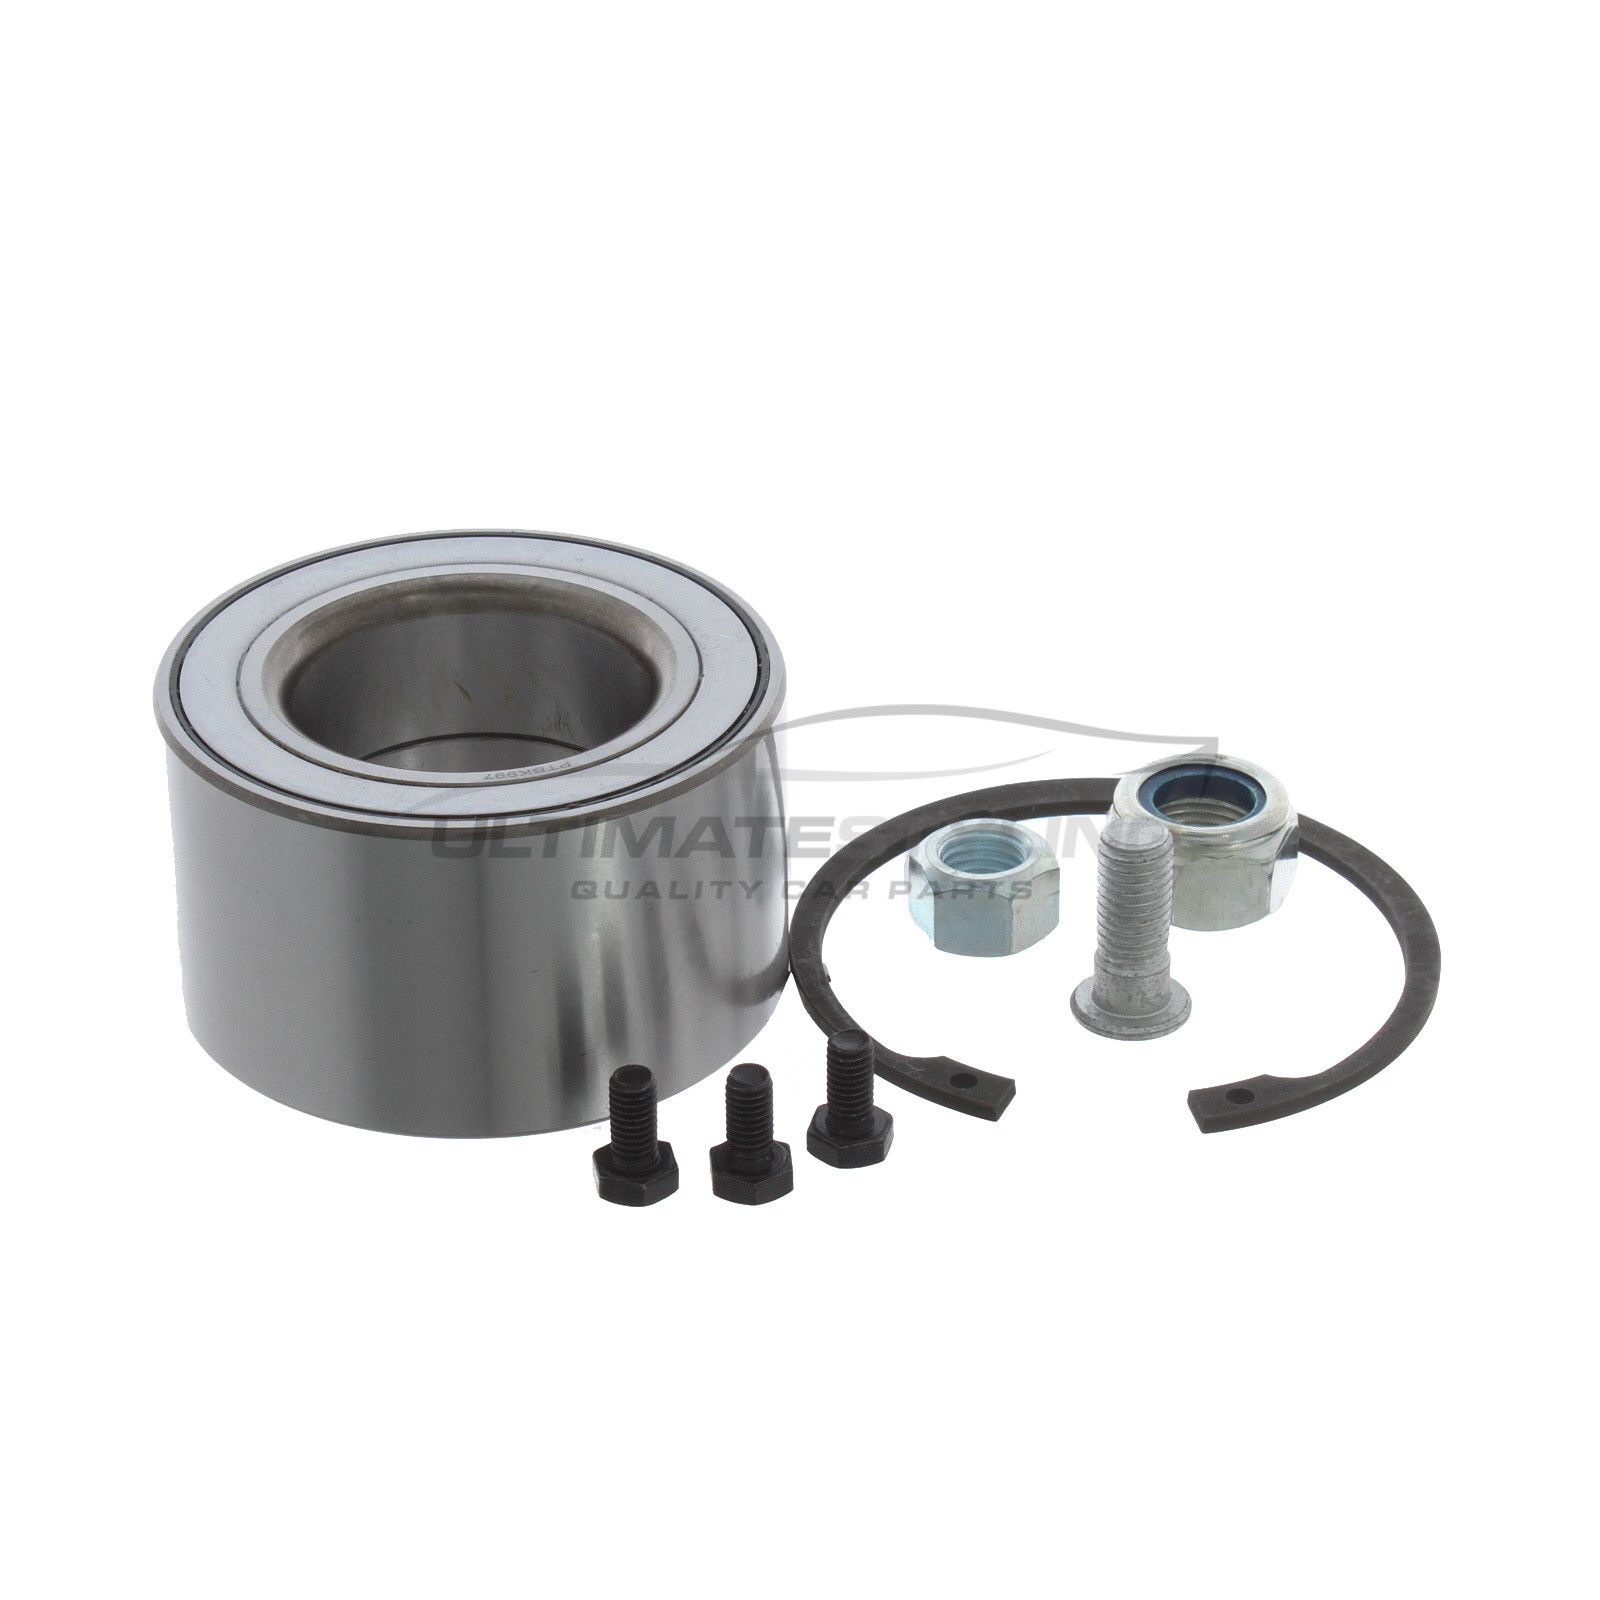 Front <span style="color:red;"><strong>OR</strong></span> Rear Wheel Bearing Kit for VW Transporter